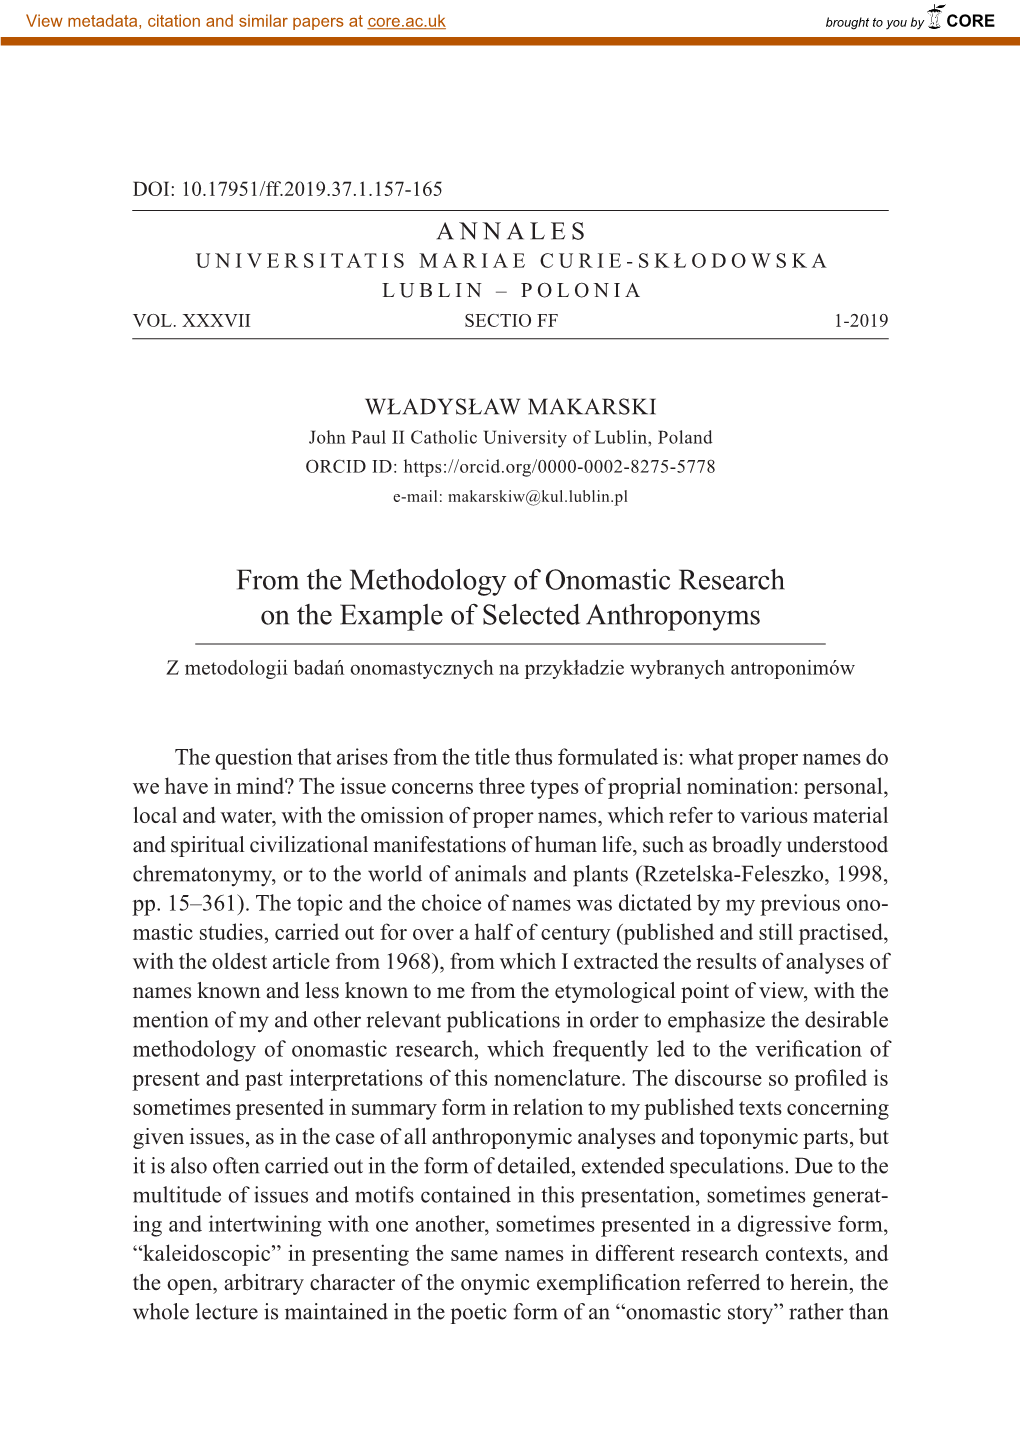 From the Methodology of Onomastic Research on the Example of Selected Anthroponyms